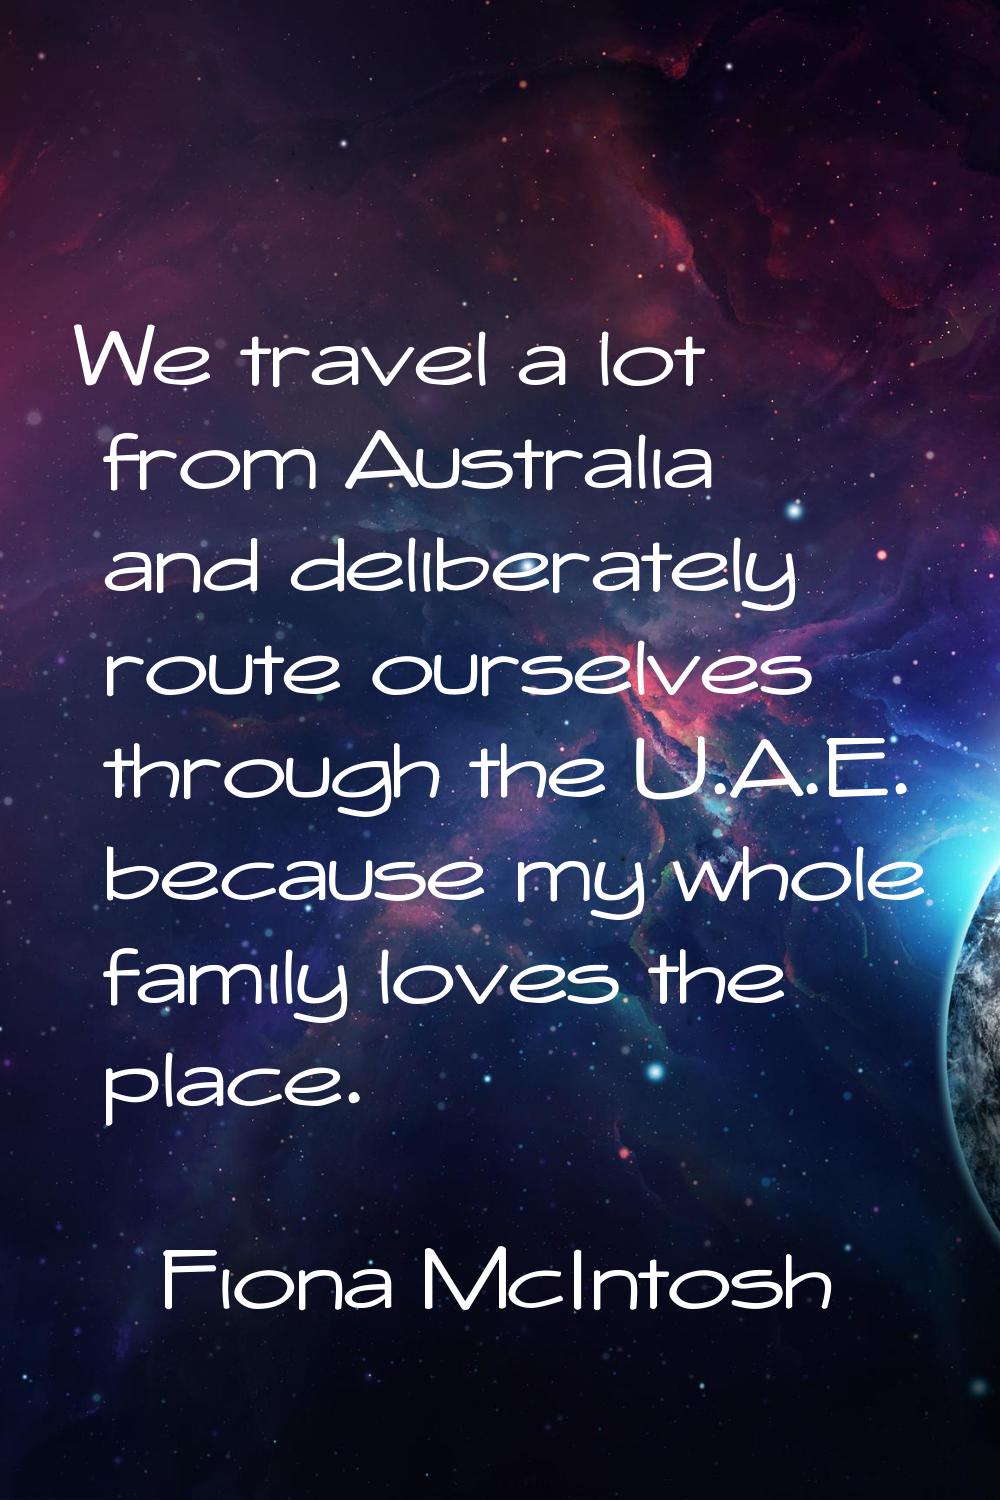 We travel a lot from Australia and deliberately route ourselves through the U.A.E. because my whole